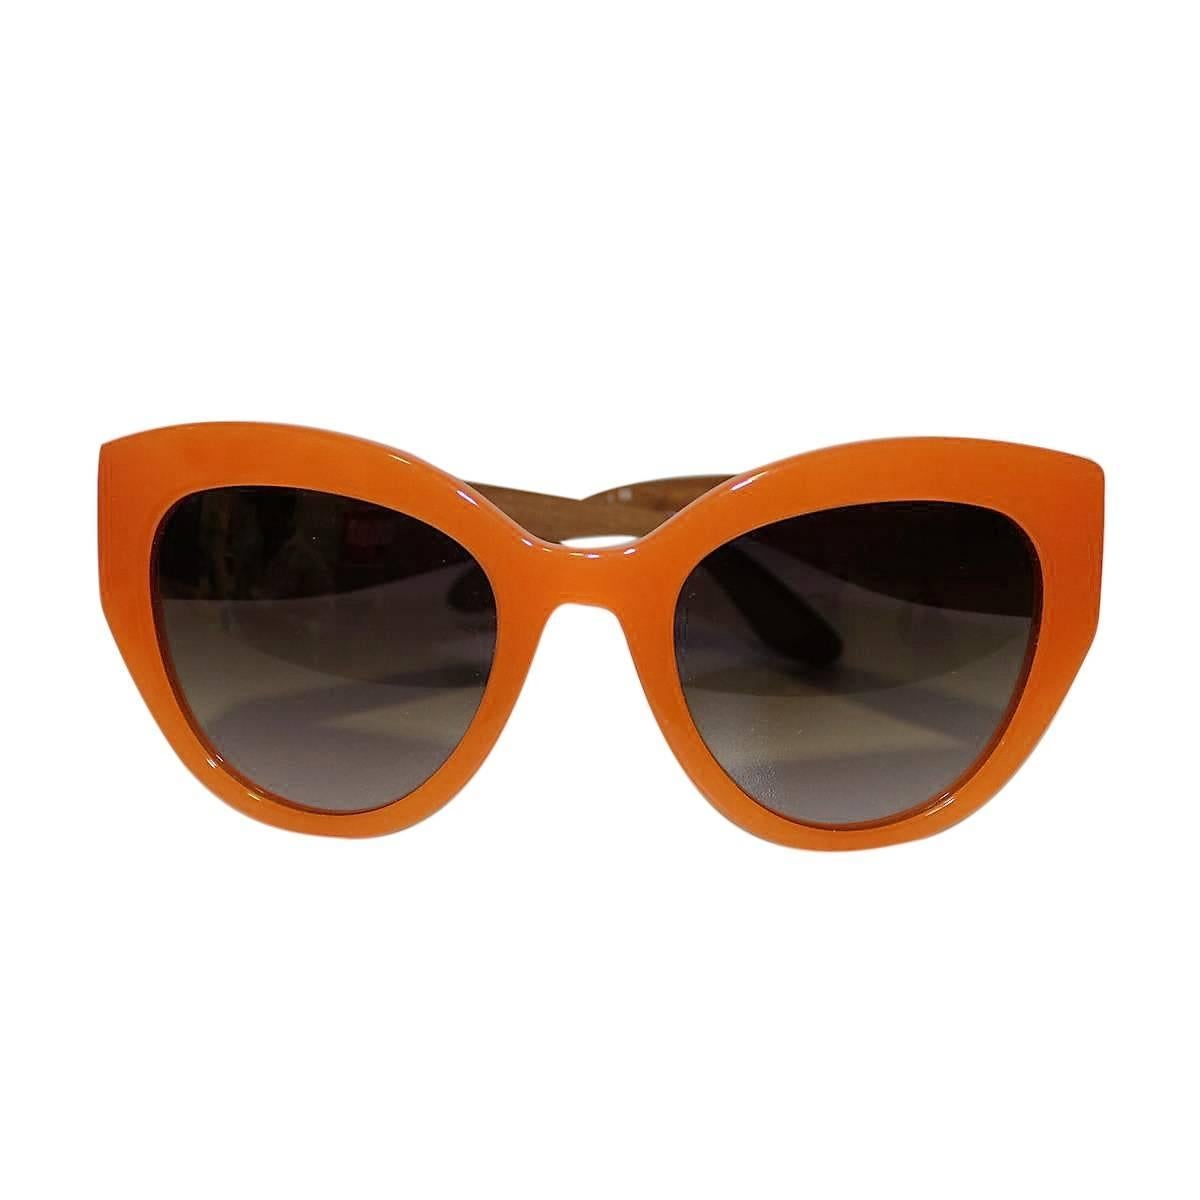 Amazing, stunning Dolce & Gabbana sunglasses
DG 4278 Sicilian carretto
2016 Collection
Special piece
Orange colour
Lateral sicilian cart
White and blue stripes
Celluloid acetate
Made in Italy
Worldwide express shipping included in the price